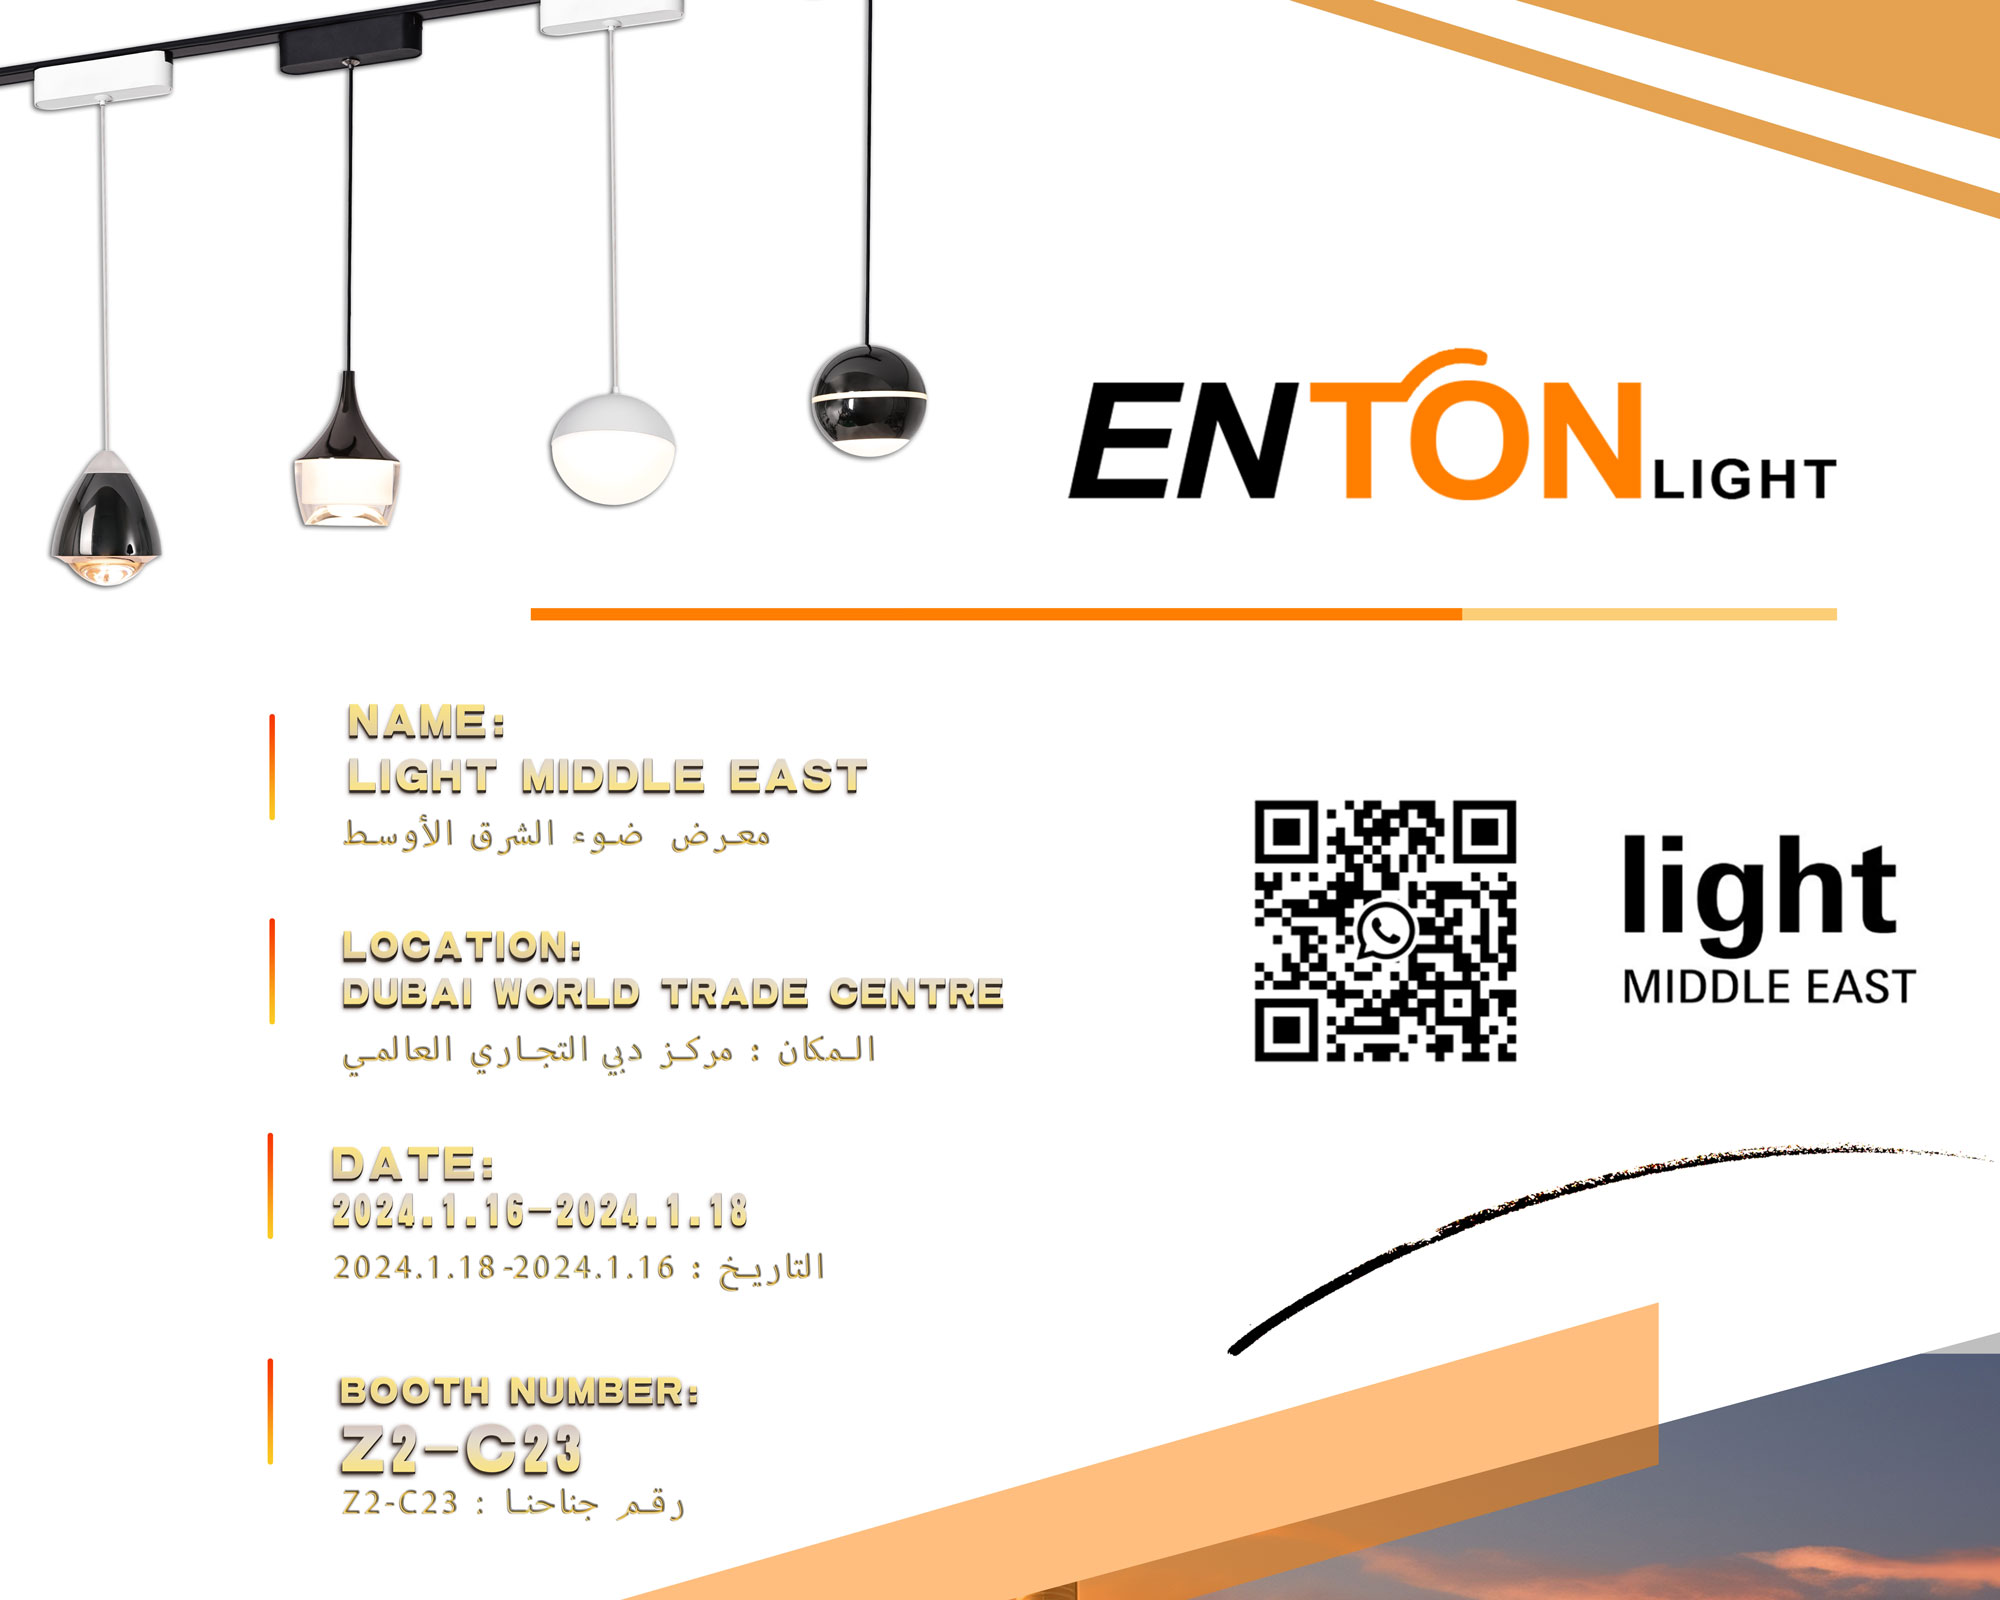 The best manufacturer and supplier of ultra-thin magnetic track lights in Light Middle East